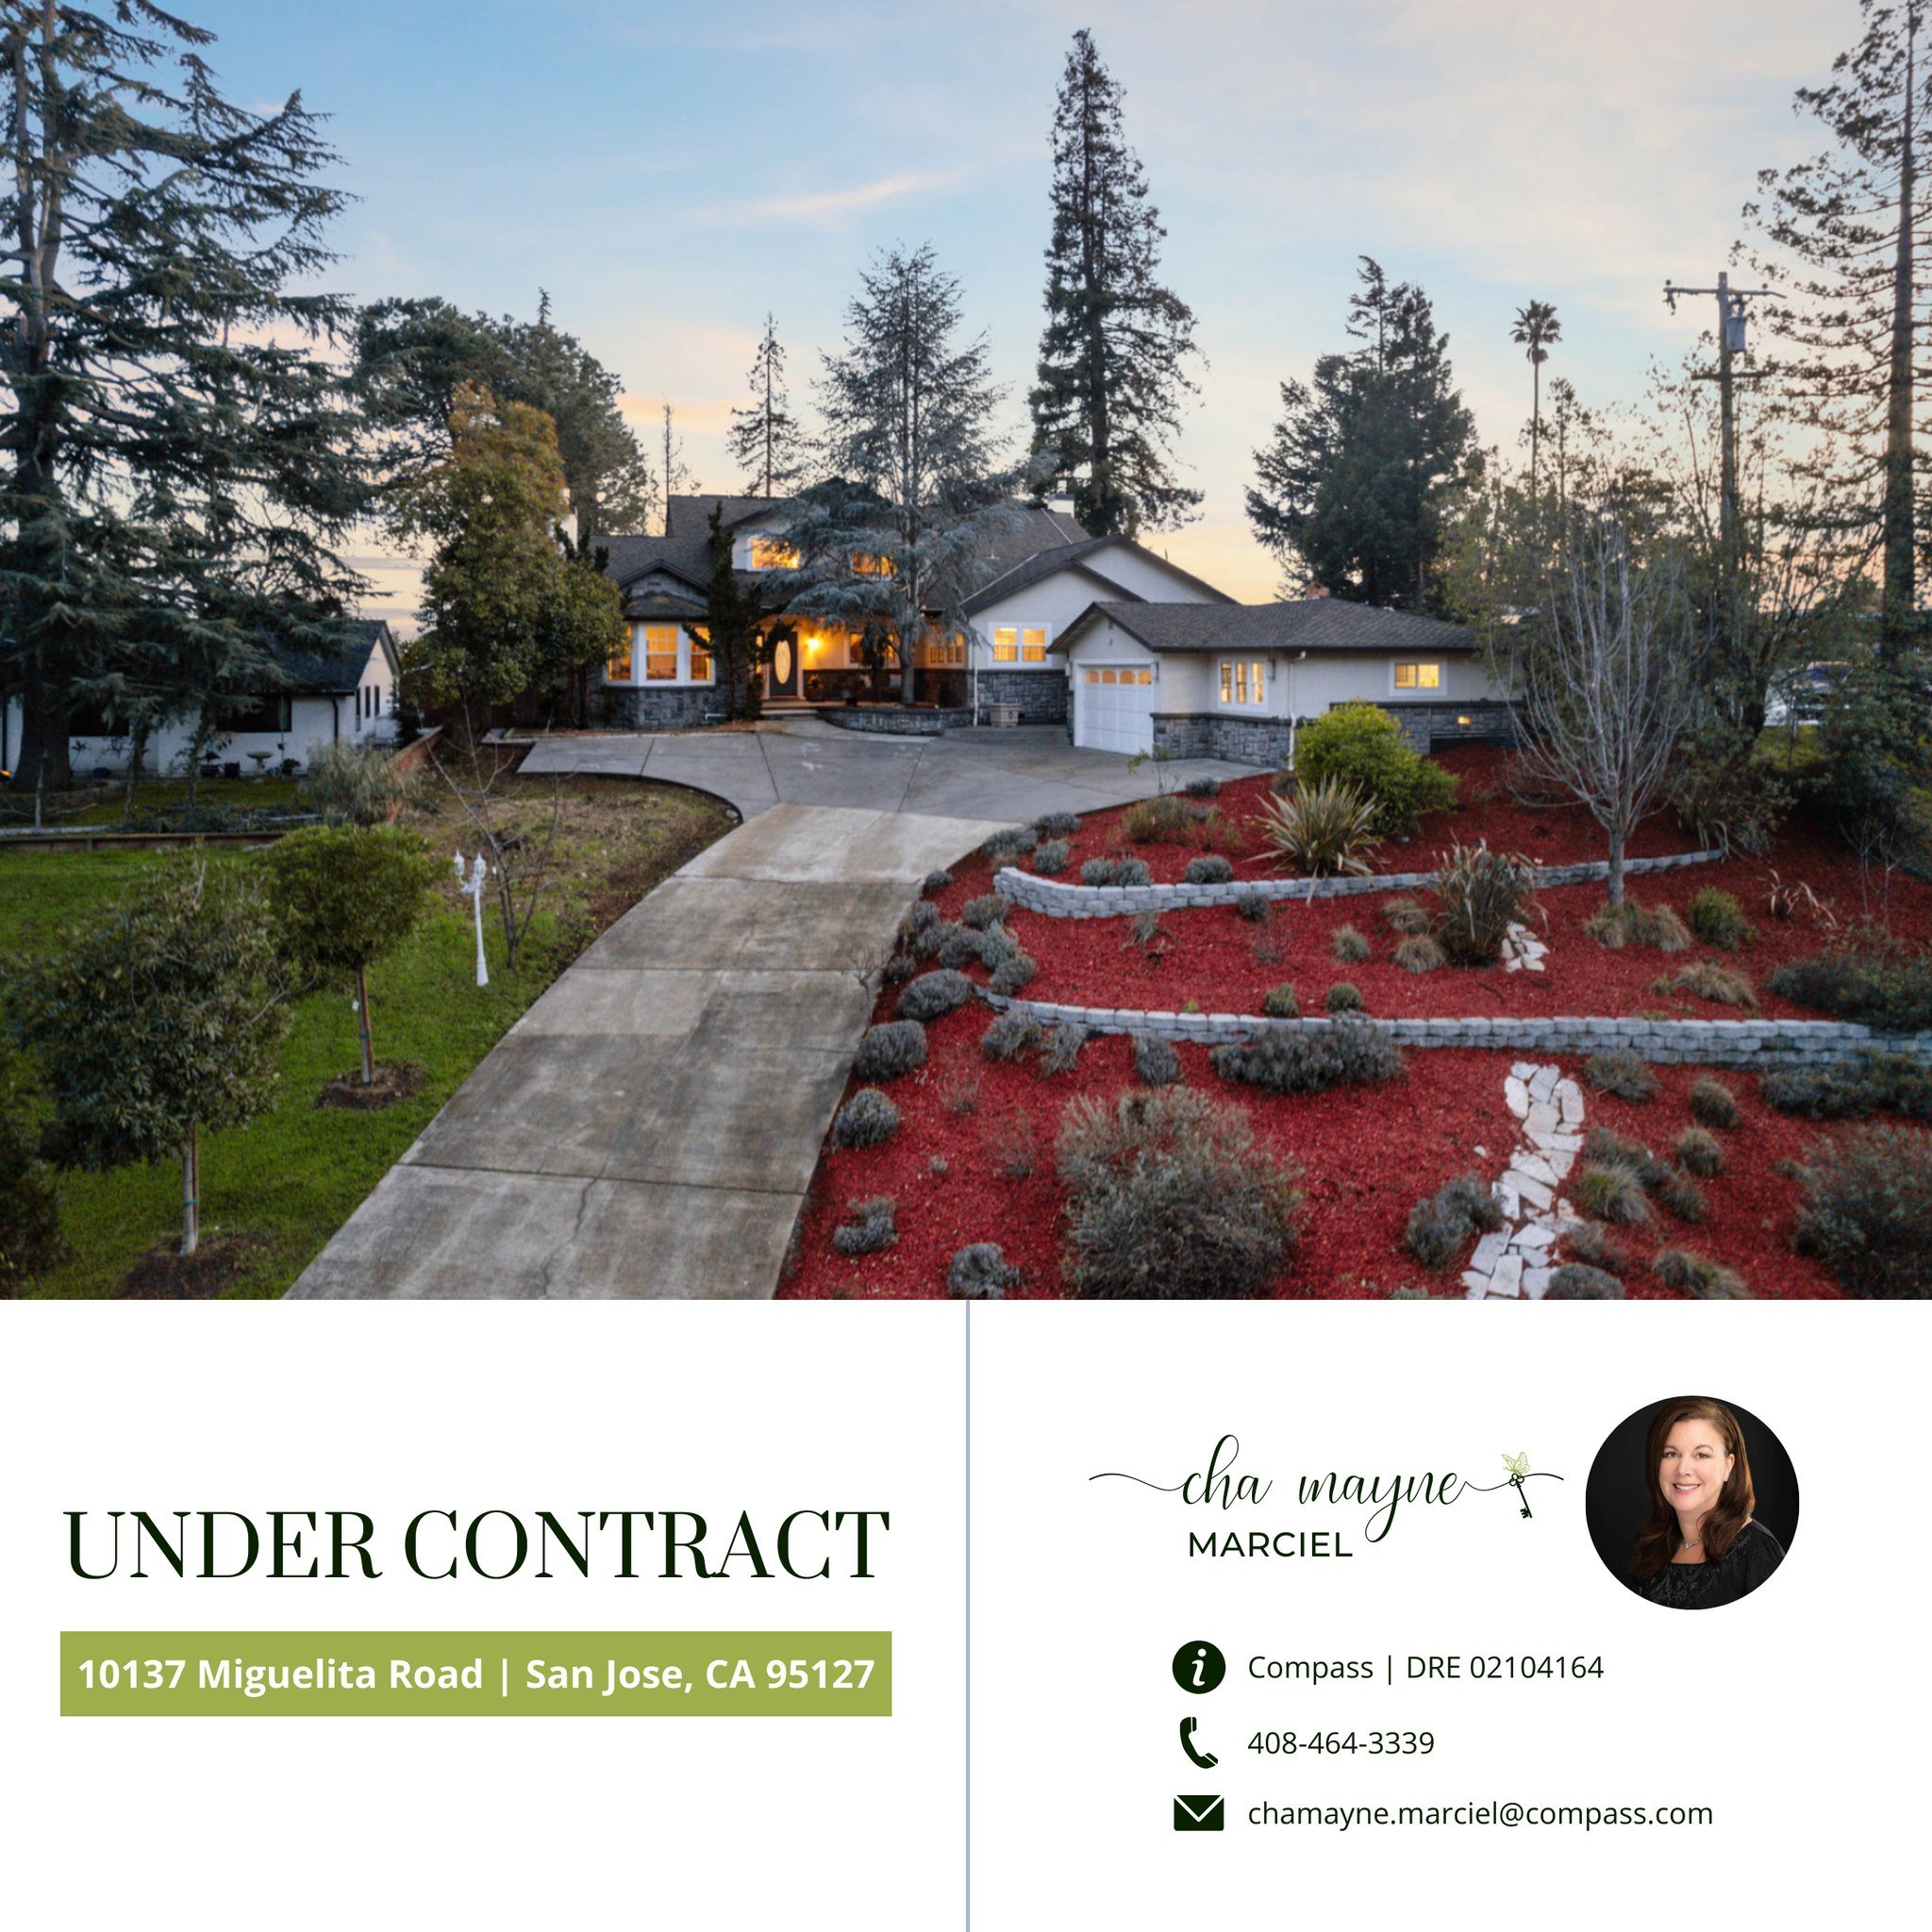 🎉 UNDER CONTRACT 🎉

This gorgeous 5BR, 4BA home, nestled just minutes from the prestigious San Jose Country Club, is officially pending sale! Sending out a huge congratulations to everyone involved in this transaction!! 🍾🏡🌳🎊

Cha Mayne Marciel
